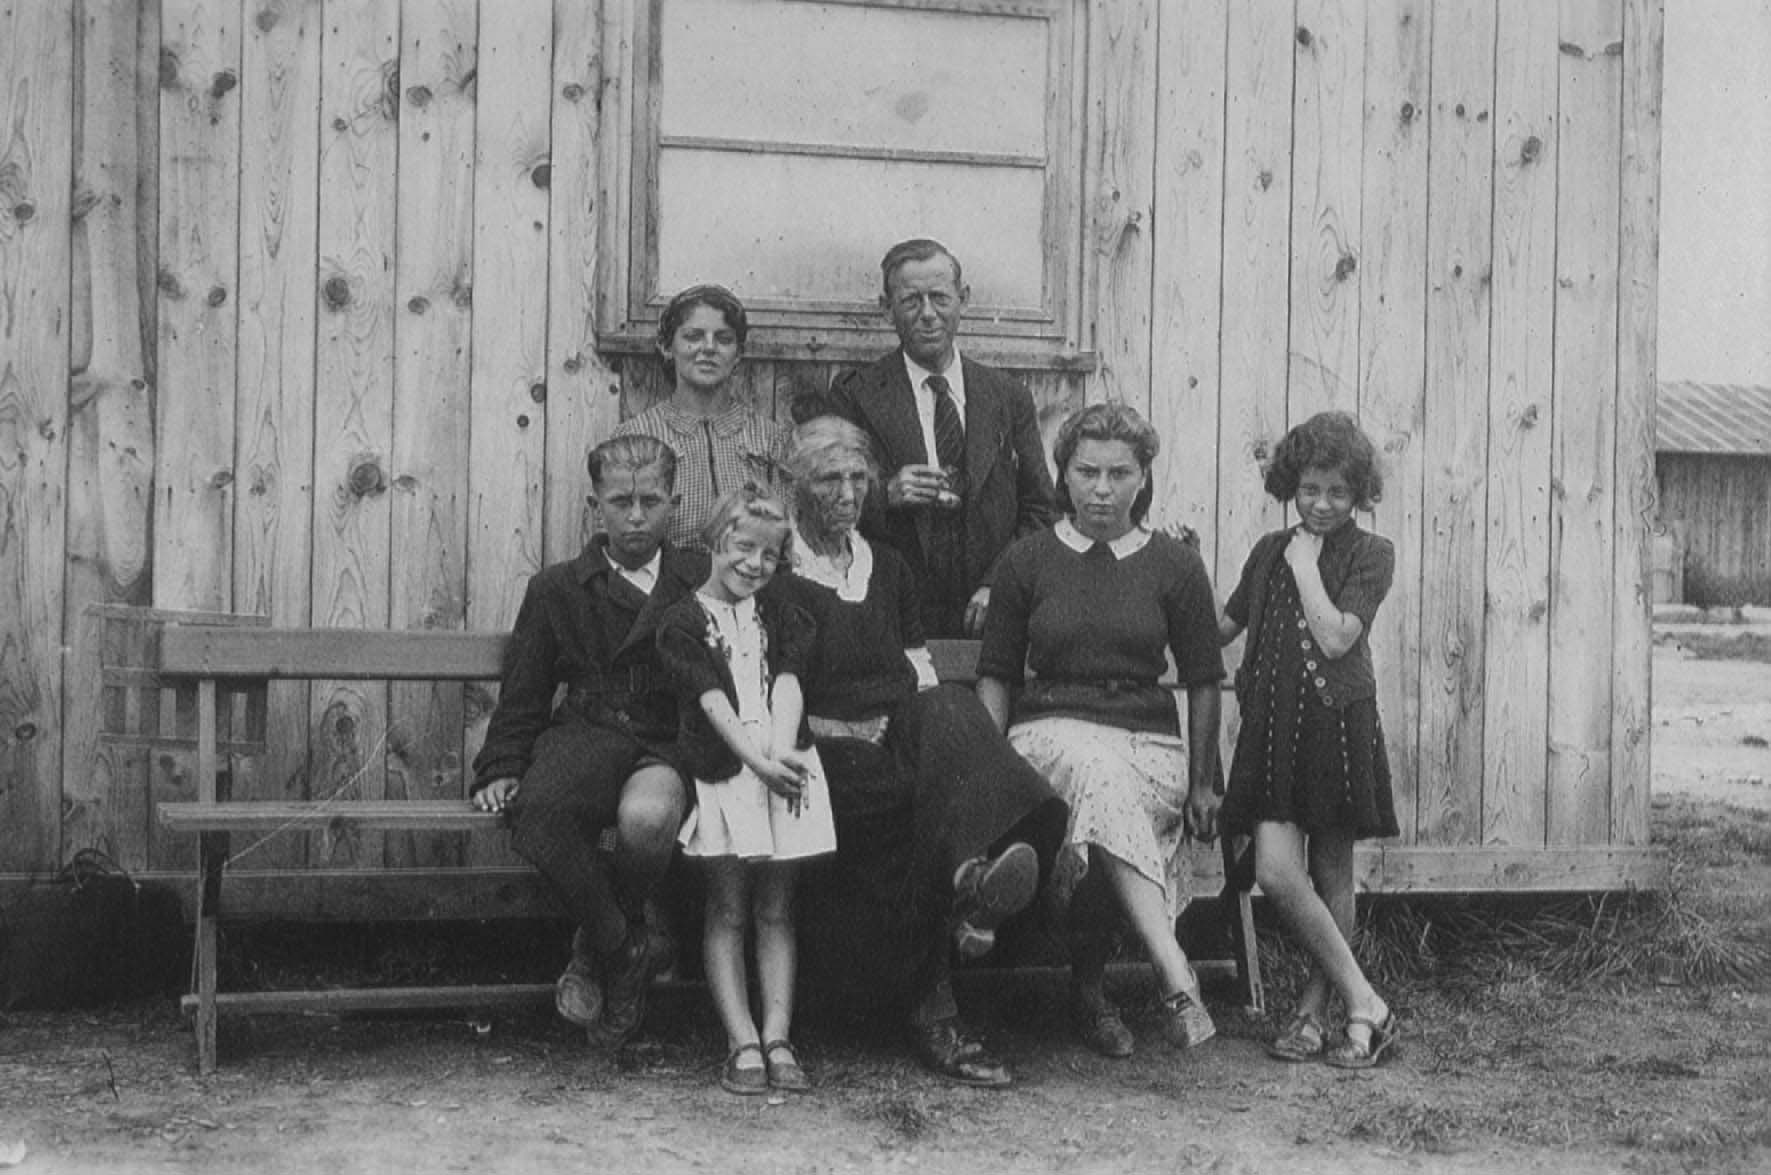 The Kann Family at the Gurs Internment Camp